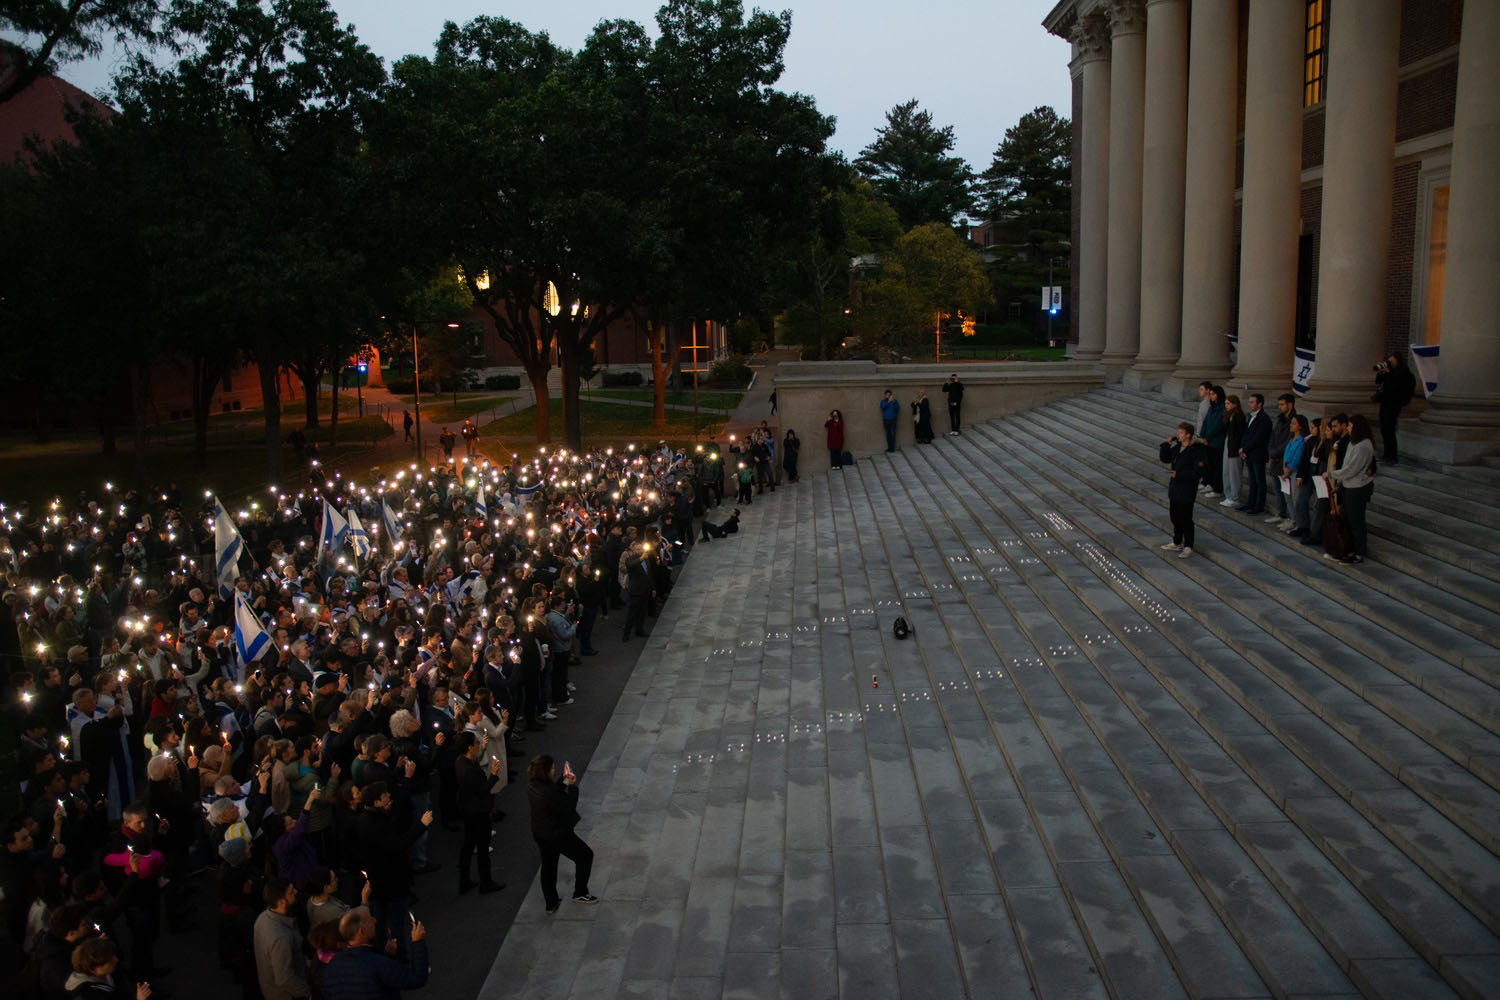 More than 1,000 people gathered by the steps of Widener Library Sunday evening for a vigil to stand in solidarity with Israel and mourn the civilian deaths of the Oct. 7 invasion by Islamist militant group Hamas. Candles on the steps spelled out חי, the Hebrew word for life.